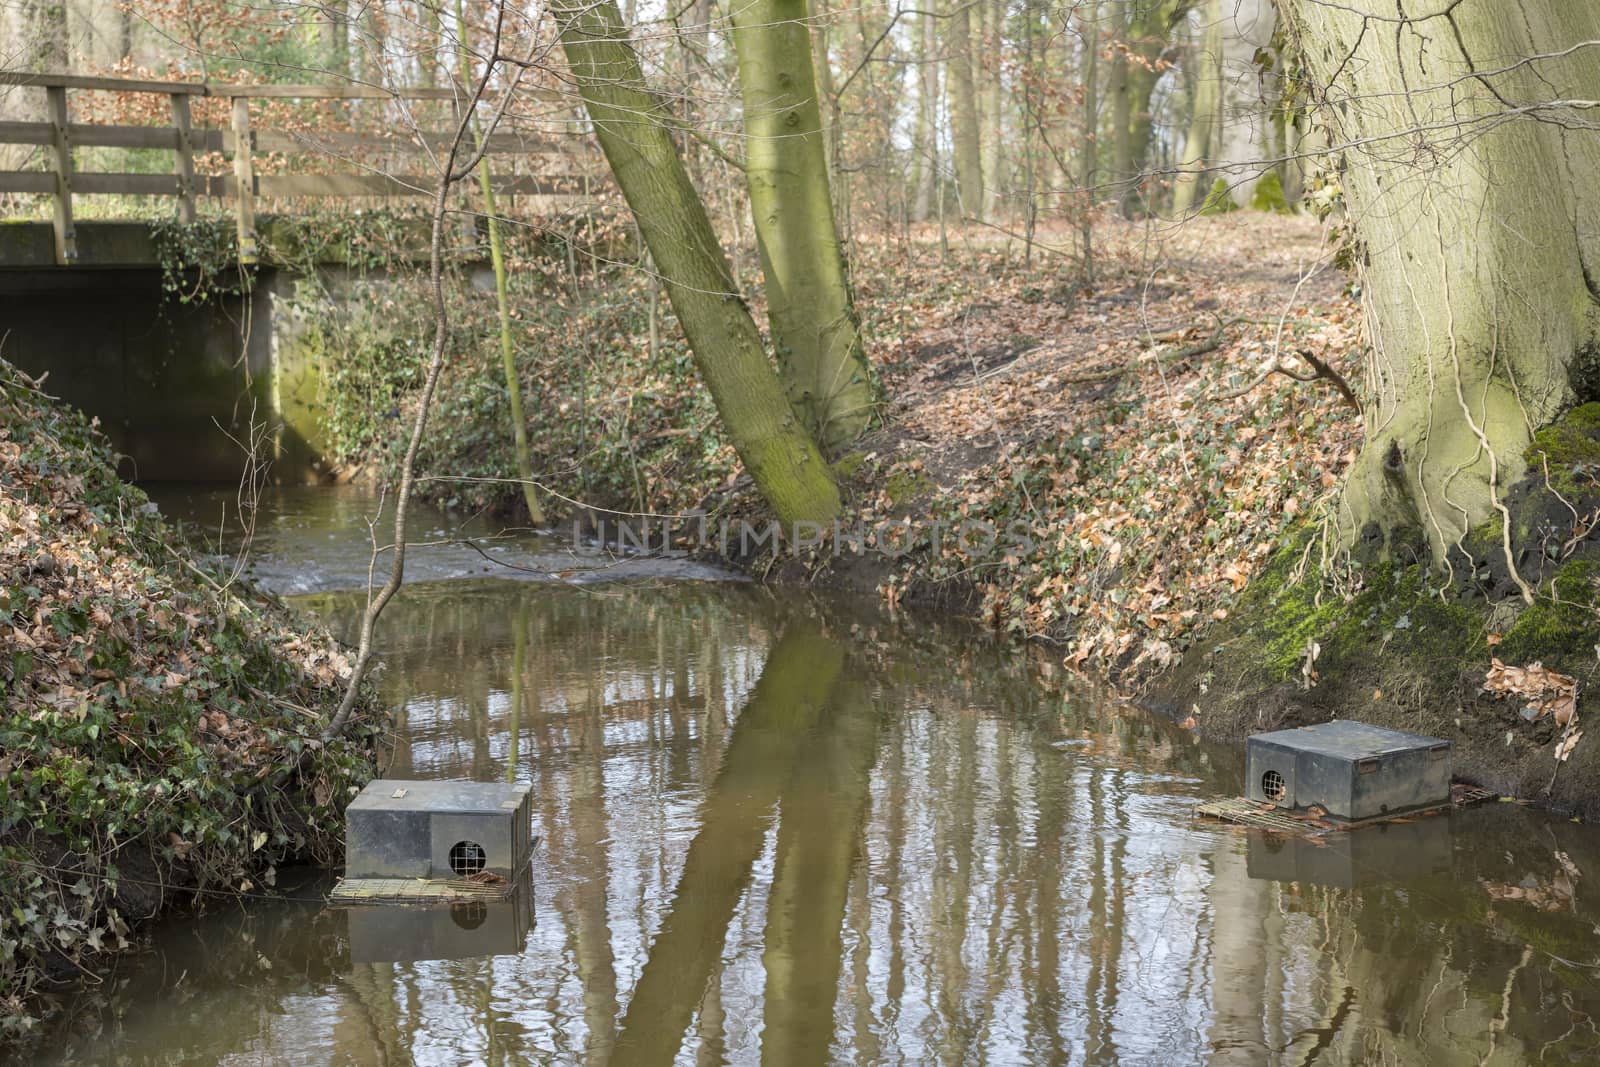 Floating muskrat trap in a natural stream in a forest in the hamlet called the Achterhoek in the Netherlands preventing the explosive growth of these beasts.
